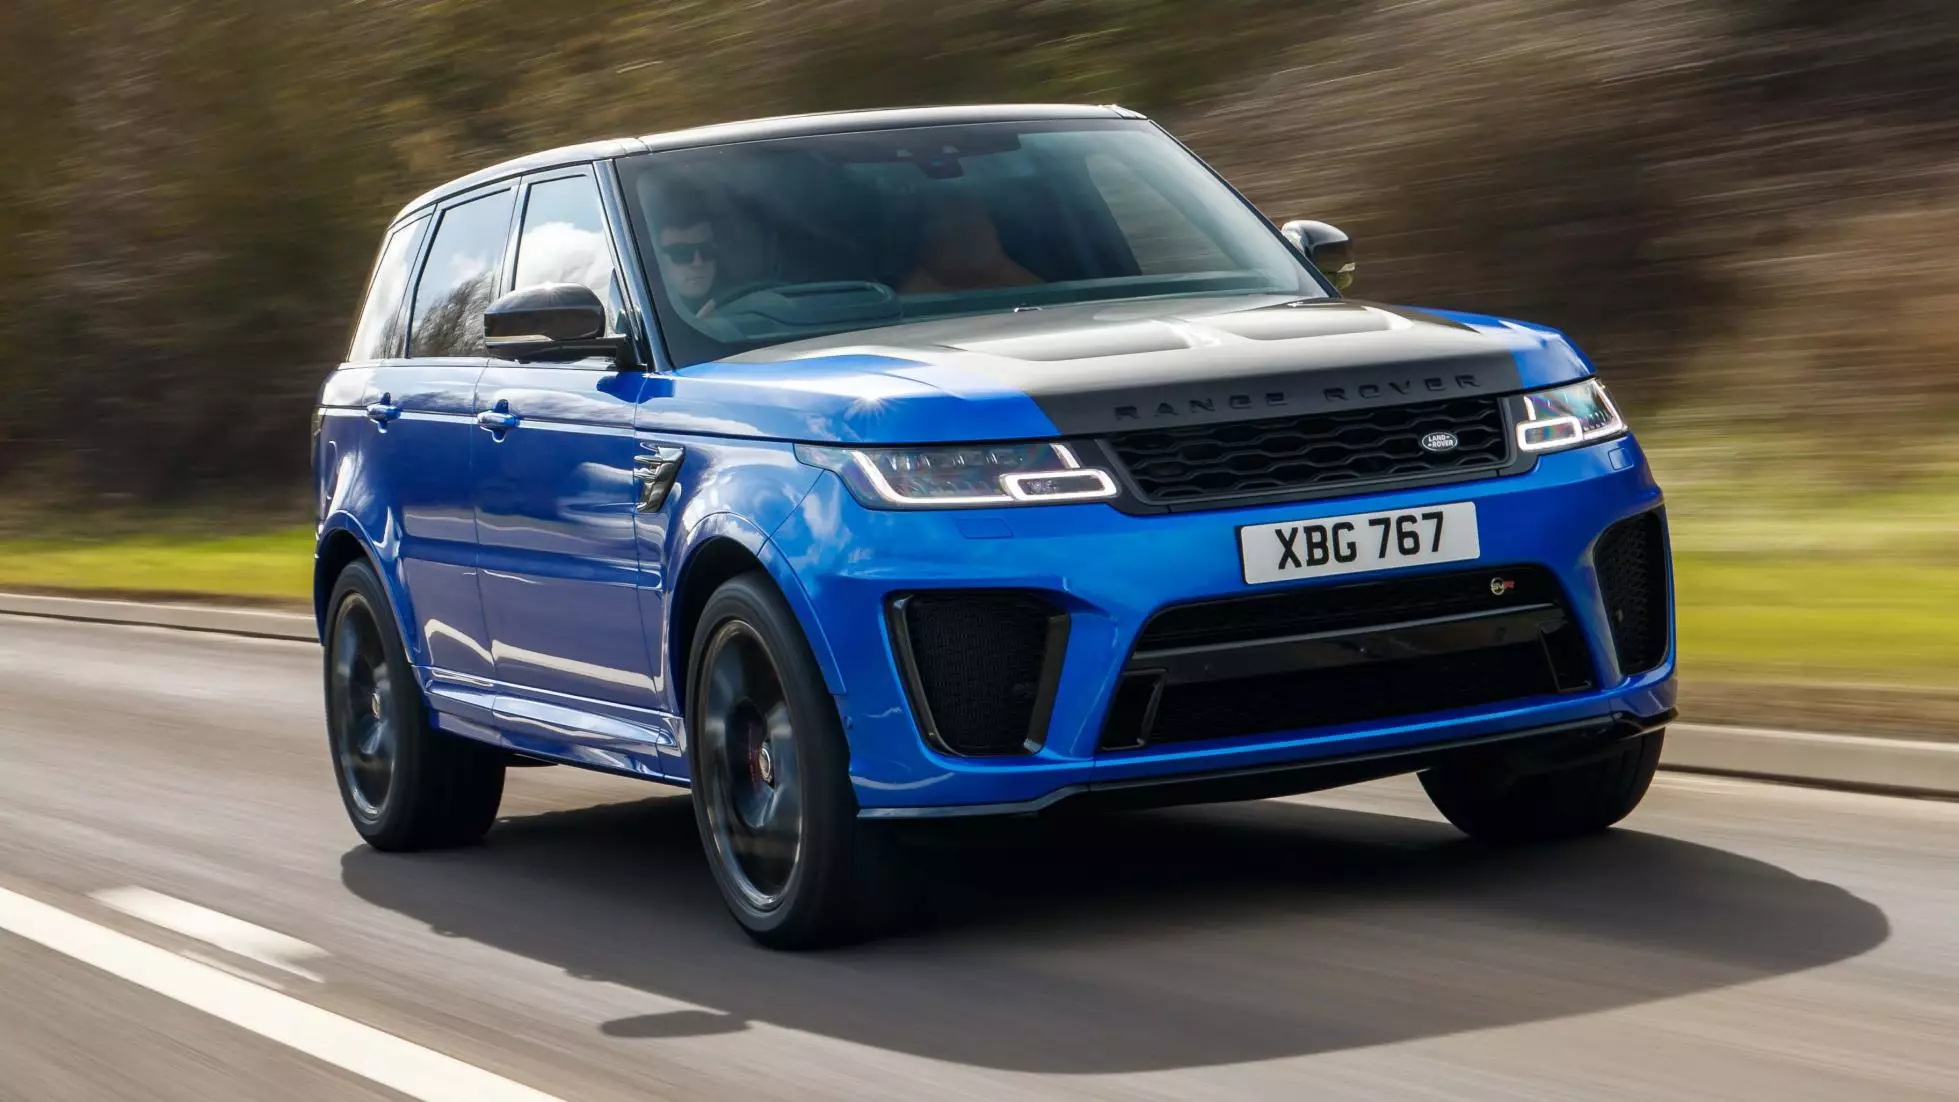 A £63,000 Range Rover Has Been Named Britain's Most Unreliable Car